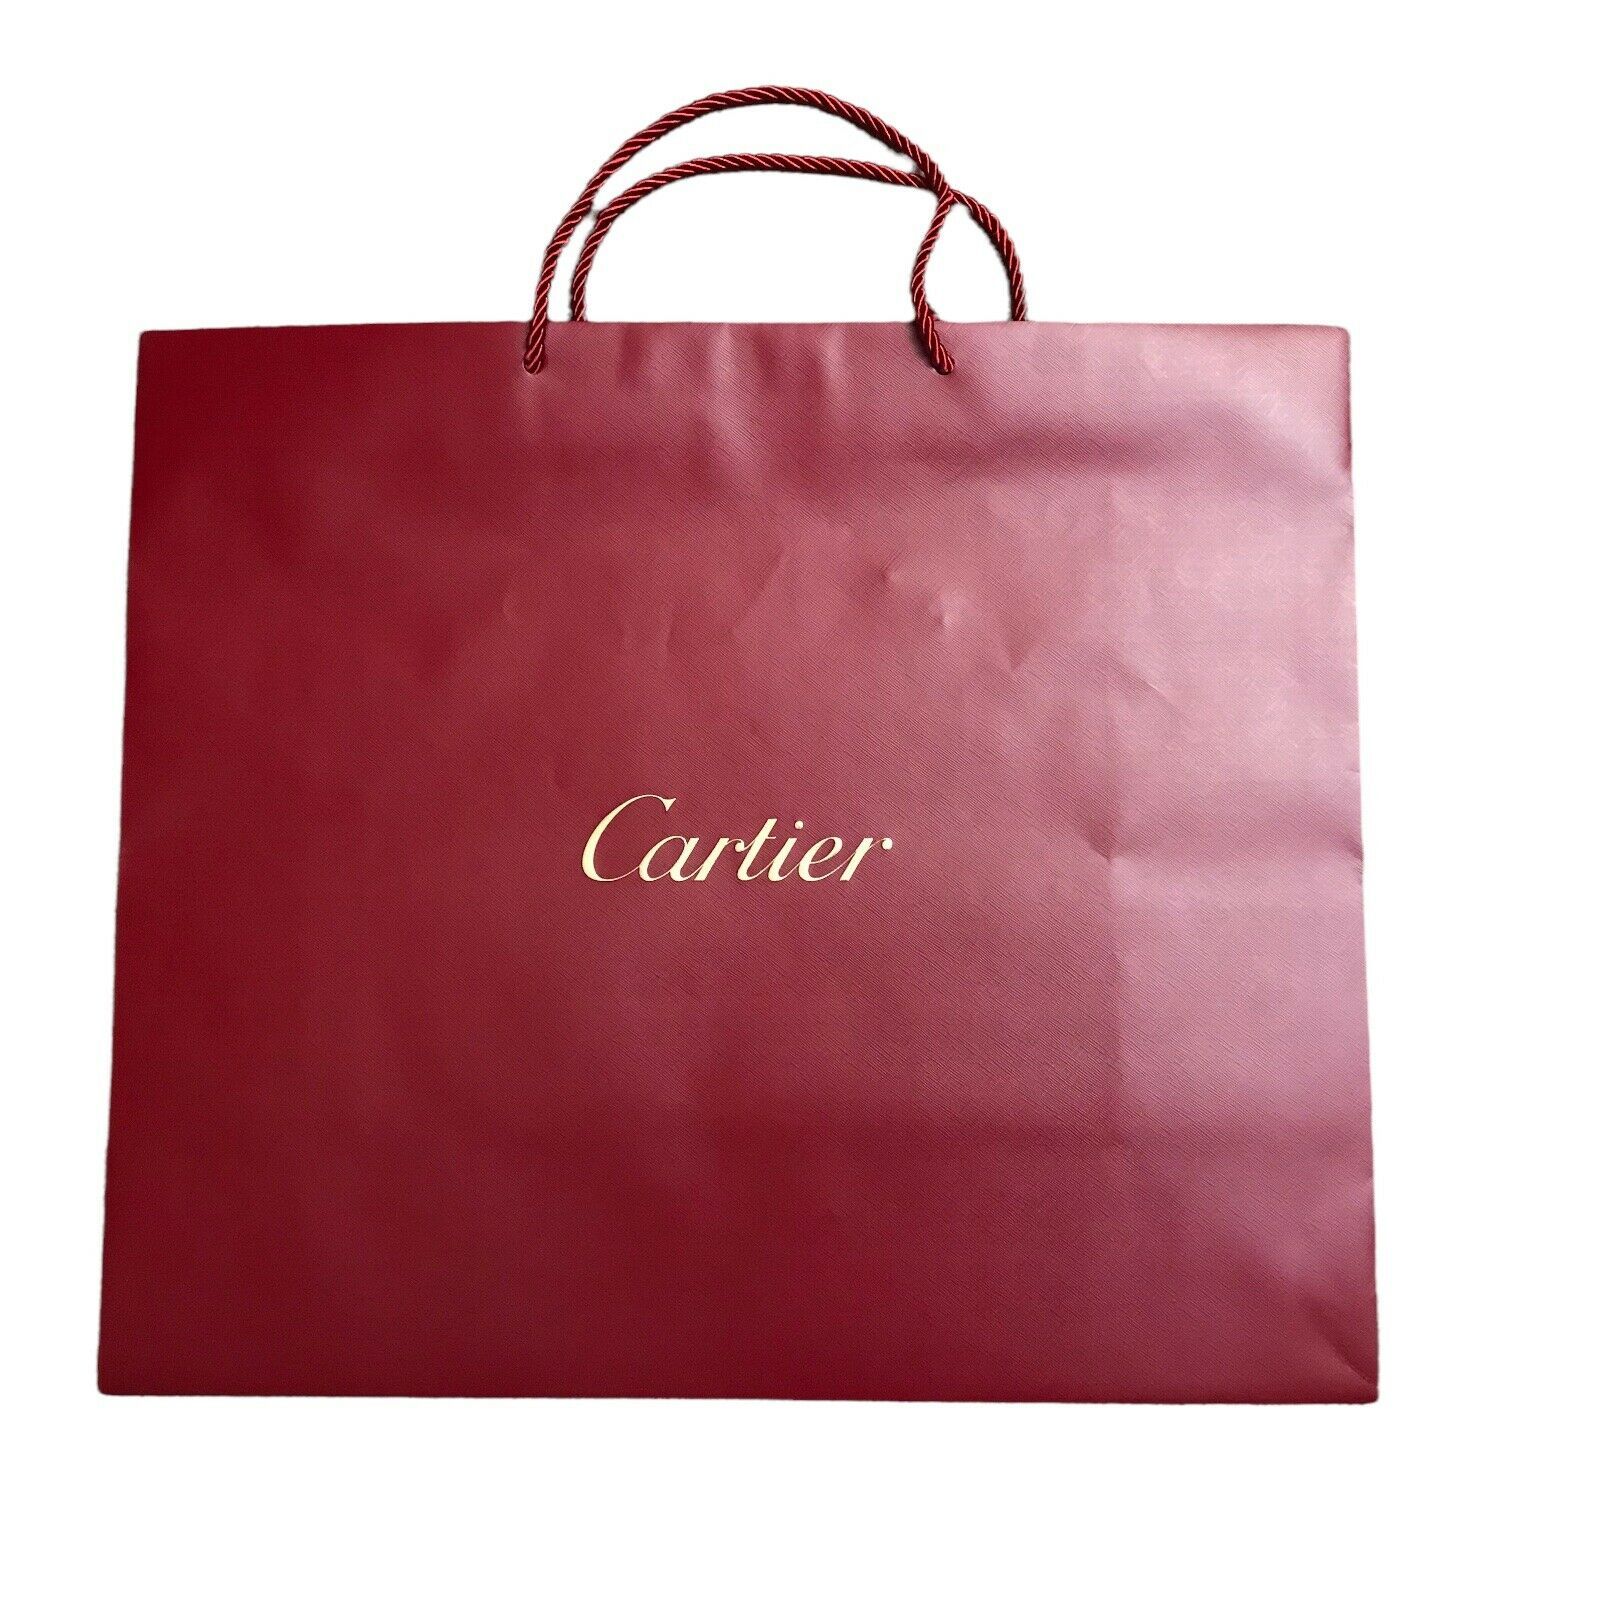 Primary image for Cartier Larger Size Shopping Bag